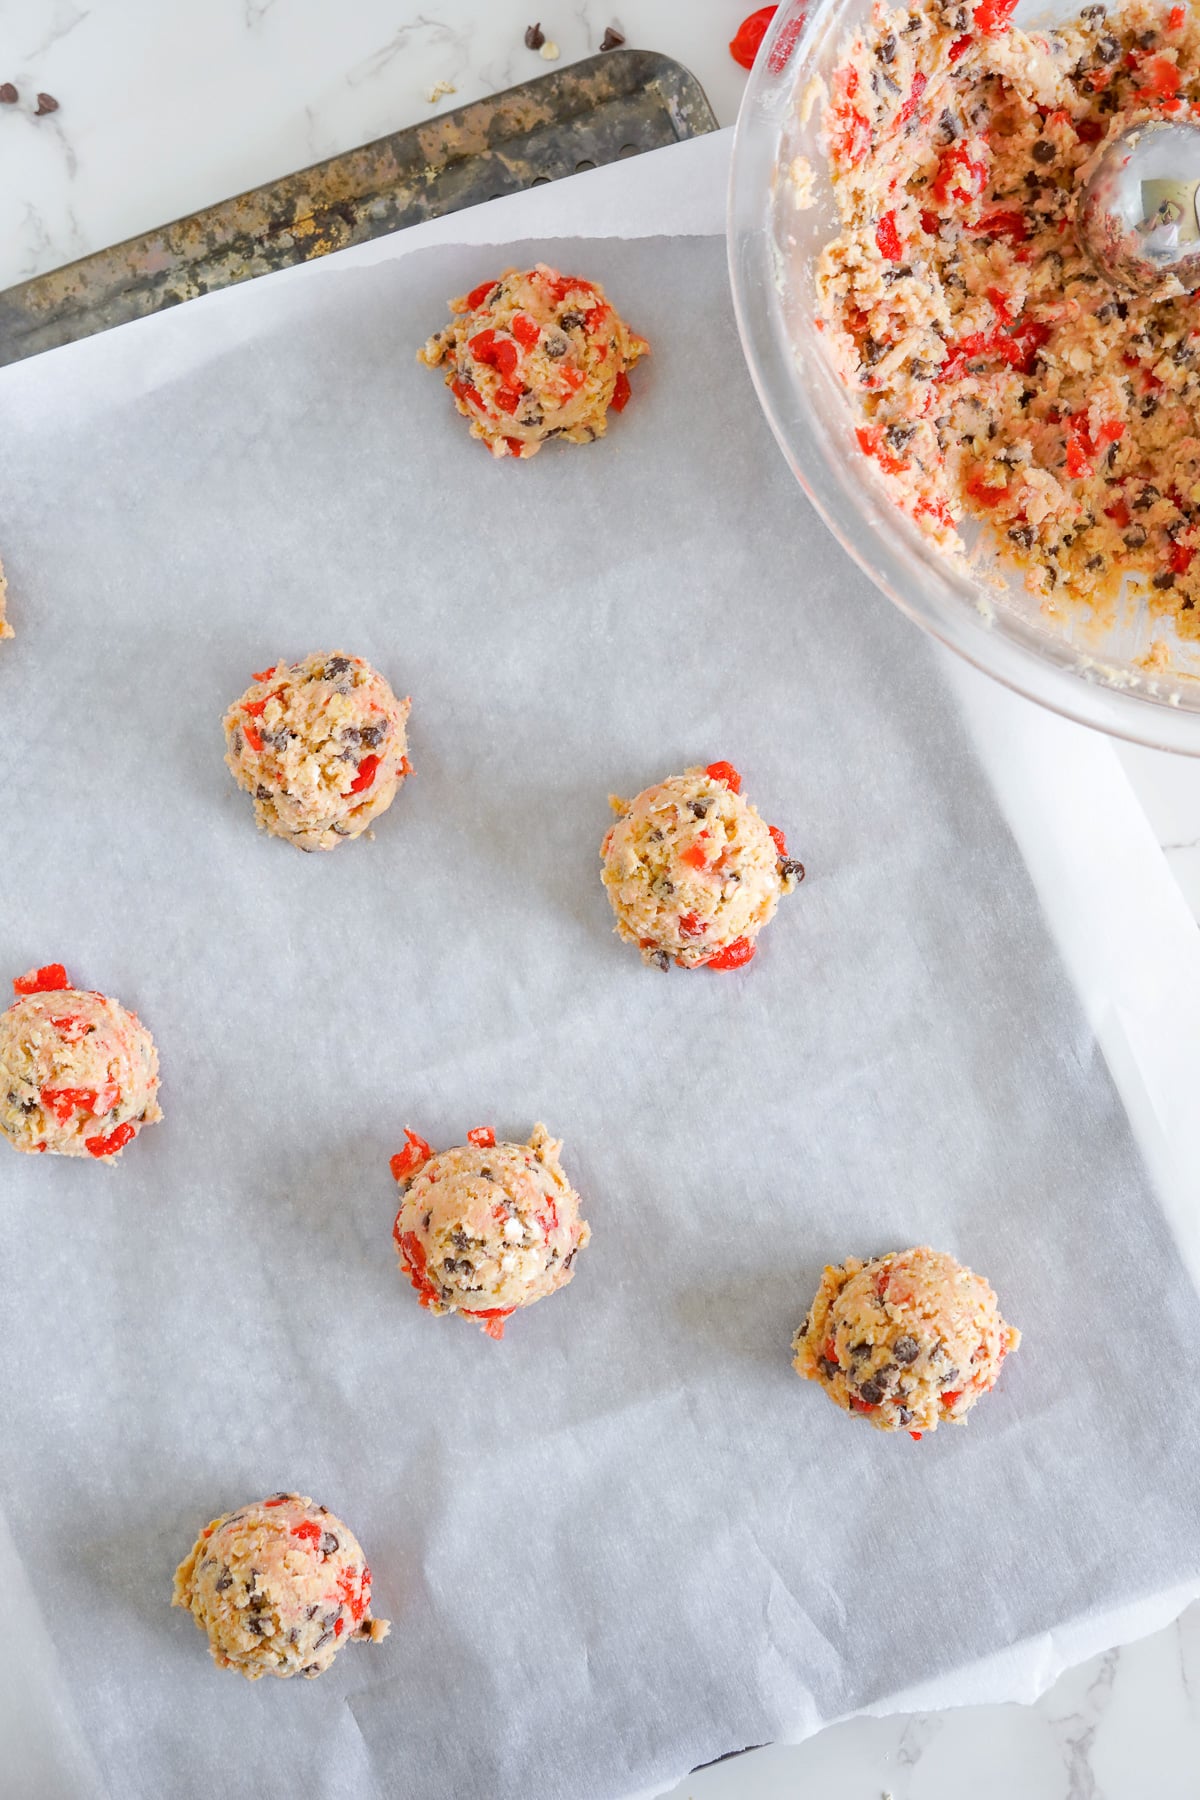 A baking sheet with maraschinio cherry cookies dough balls on it with a bowl of cookie dough nearby.